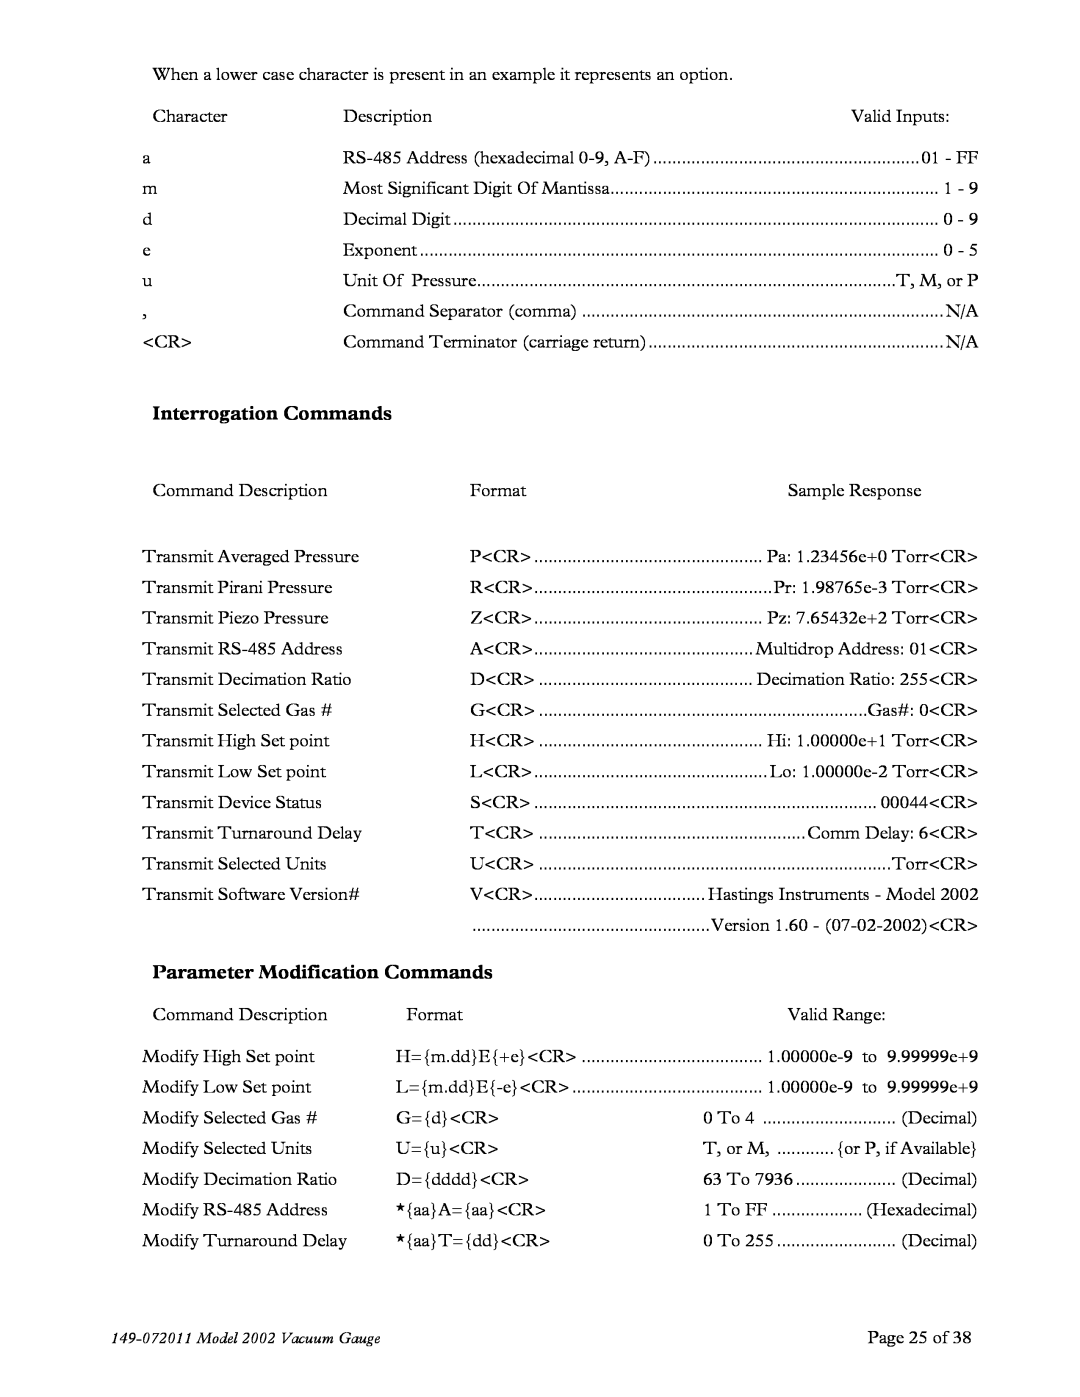 Teledyne 2002 instruction manual Interrogation Commands, Parameter Modification Commands, Page 25 of 